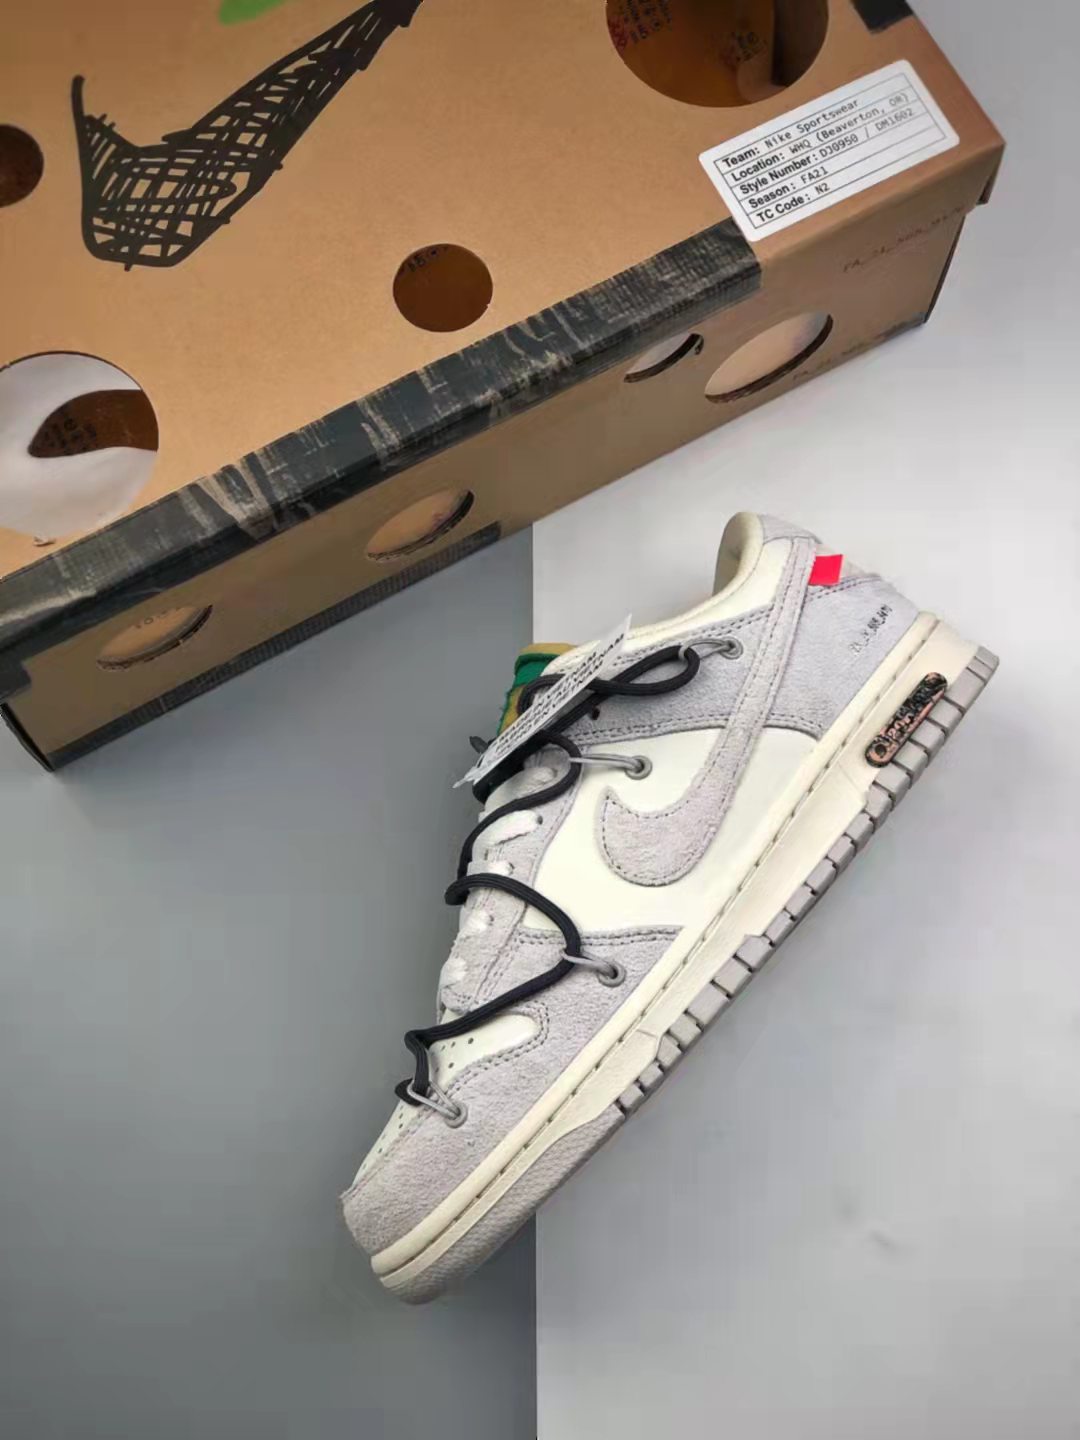 Nike Off-White x Dunk Low 'Lot 20 of 50' DJ0950-115 - Limited Edition Collaboration